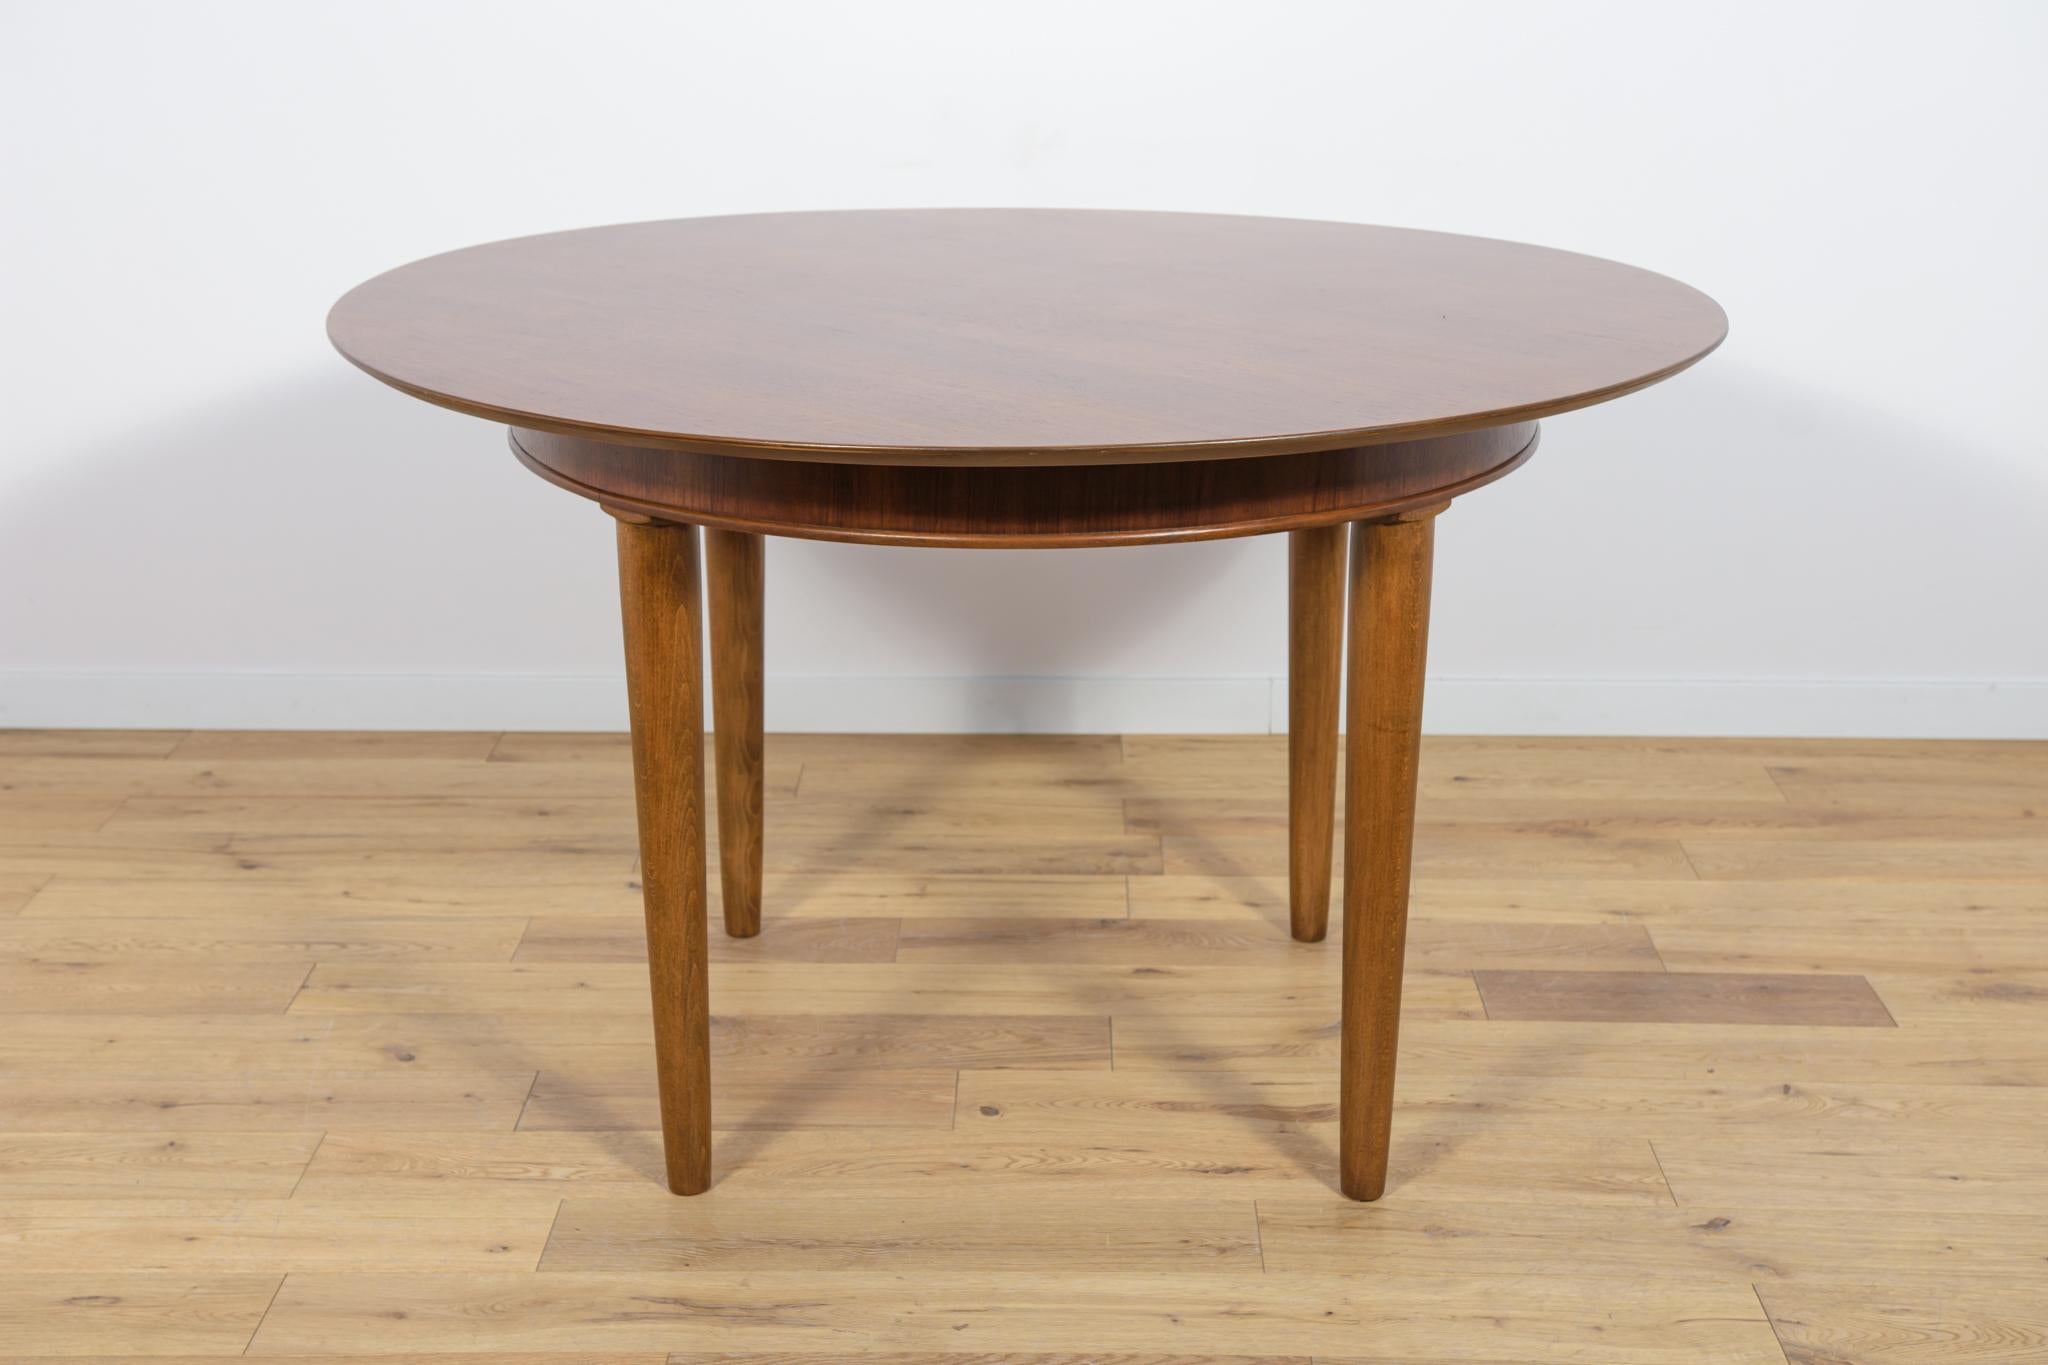 A round table made of teak wood, manufactured in Great Britain in the 1950s. The table has an interesting grain. The furniture has undergone comprehensive carpentry renovation. It was cleaned of the old surface, painted with oak stain, and finished